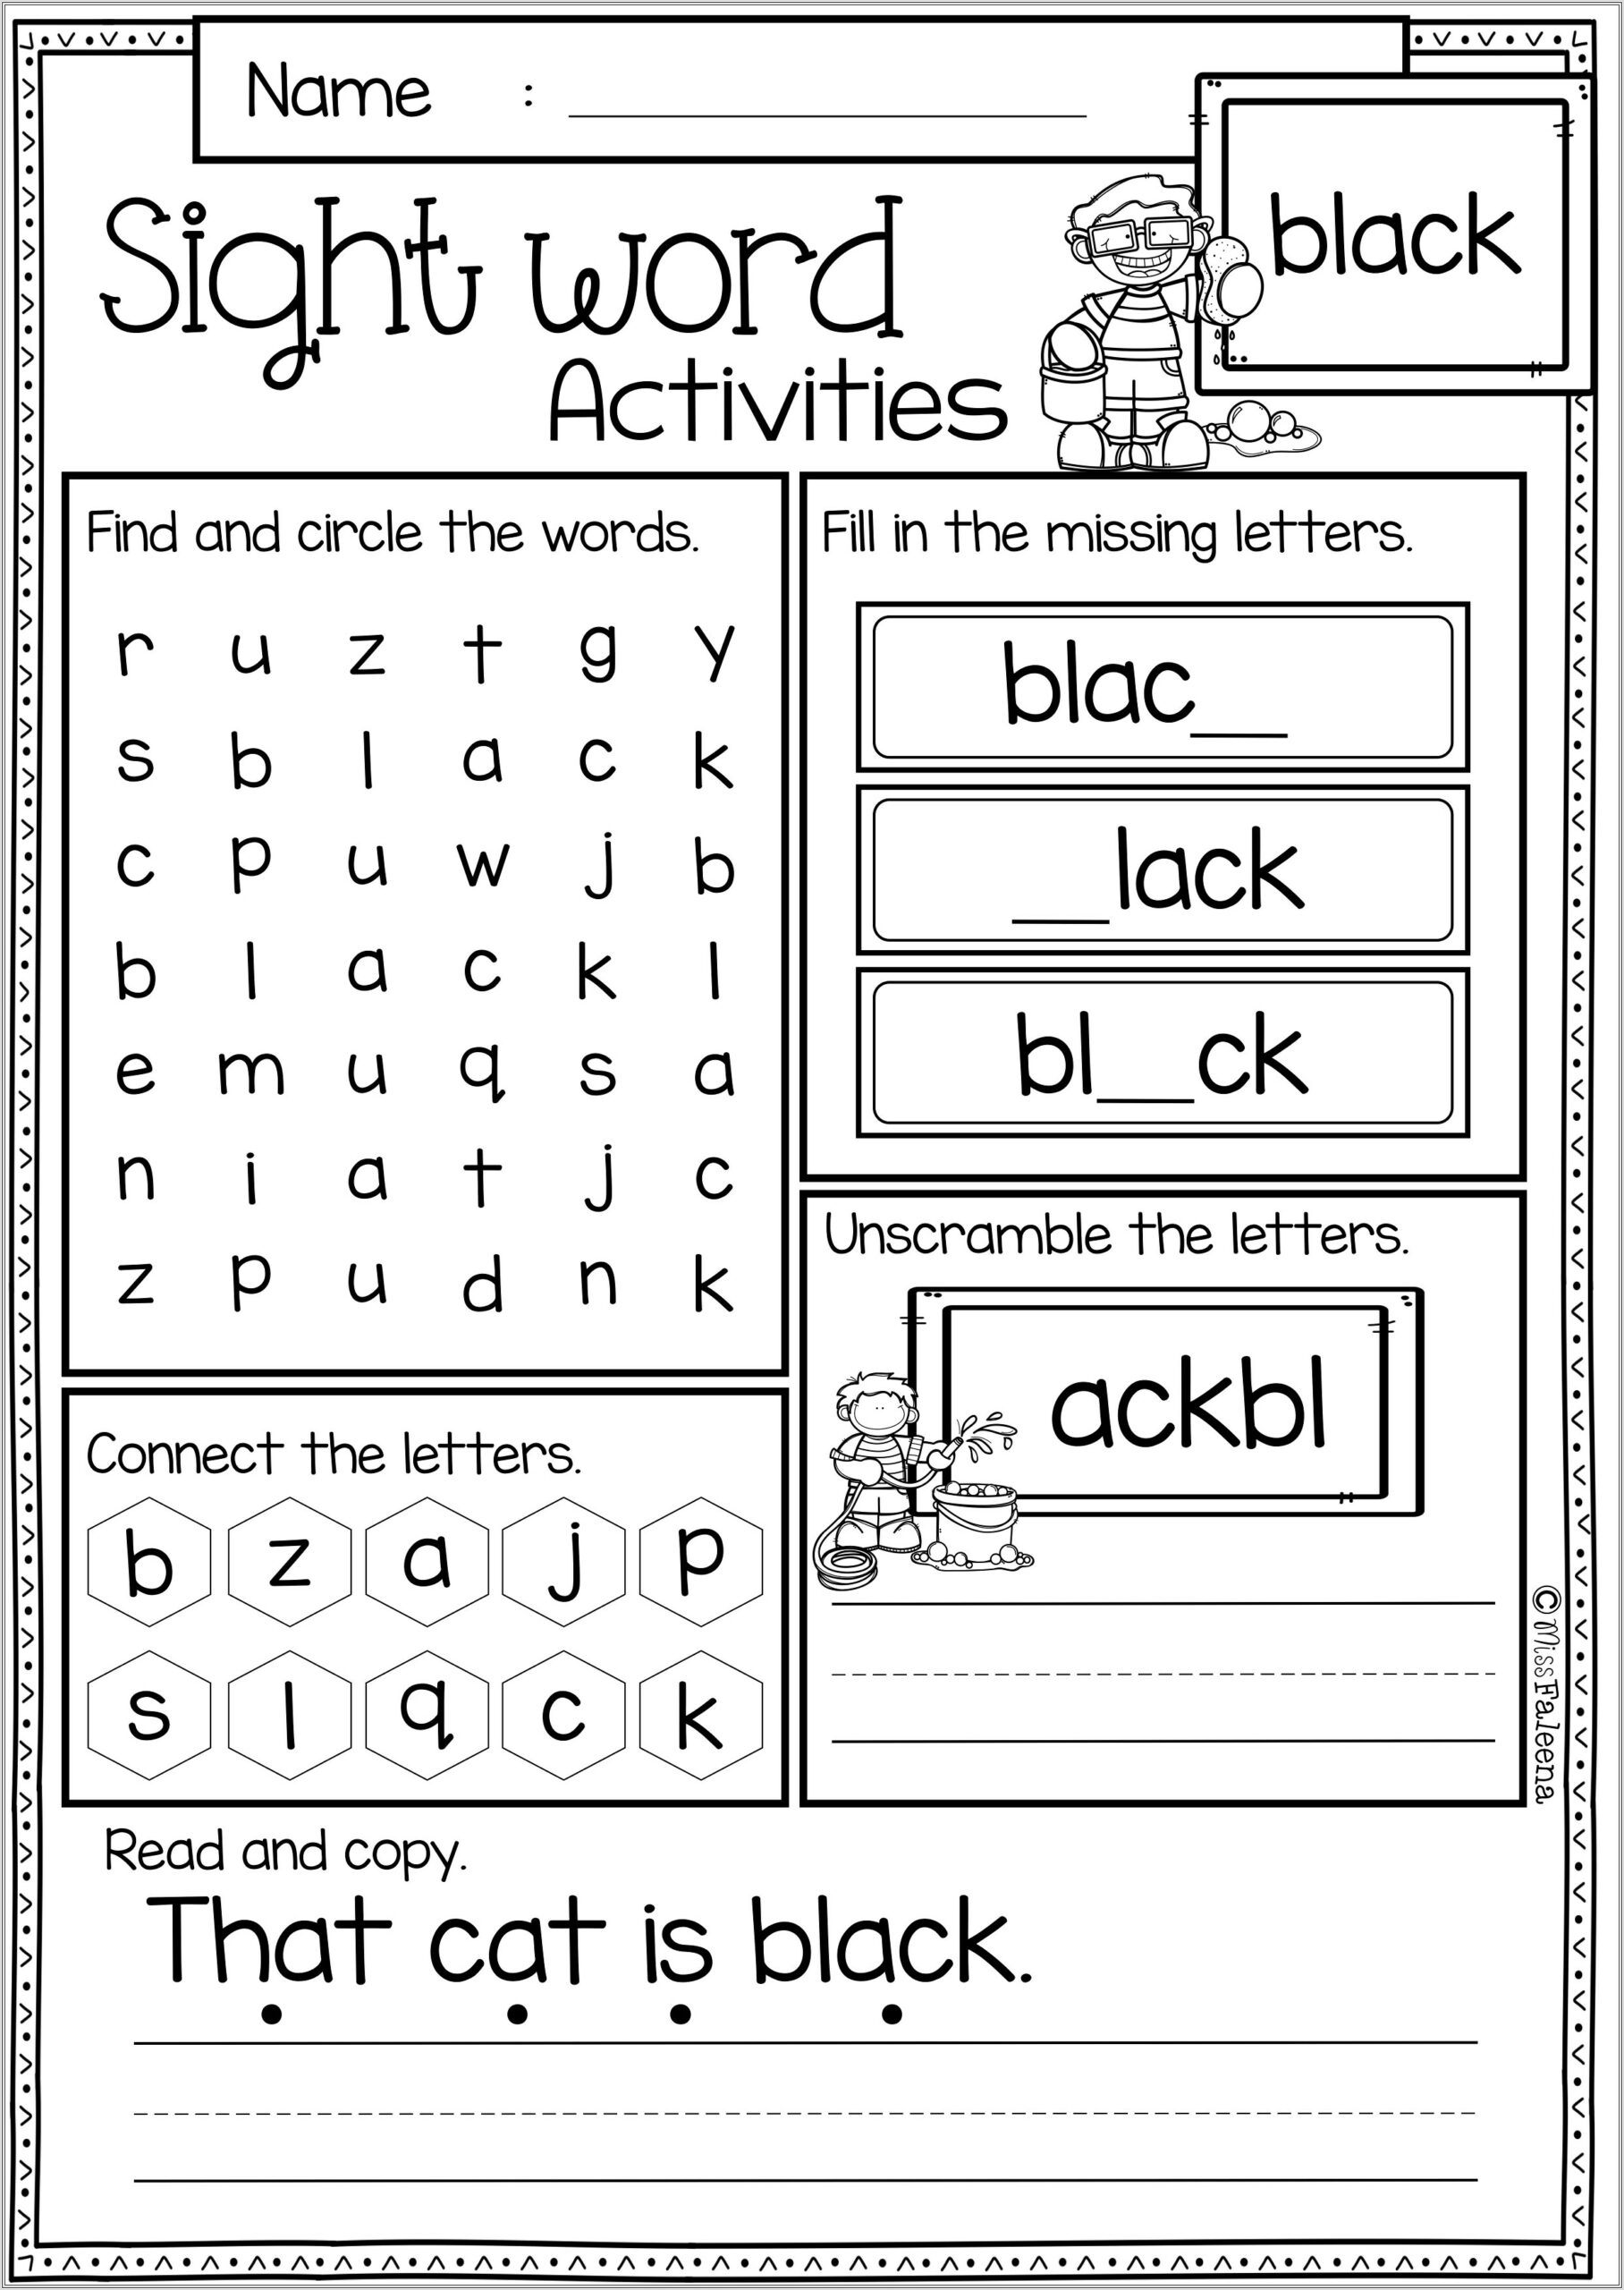 Can Sight Word Worksheet